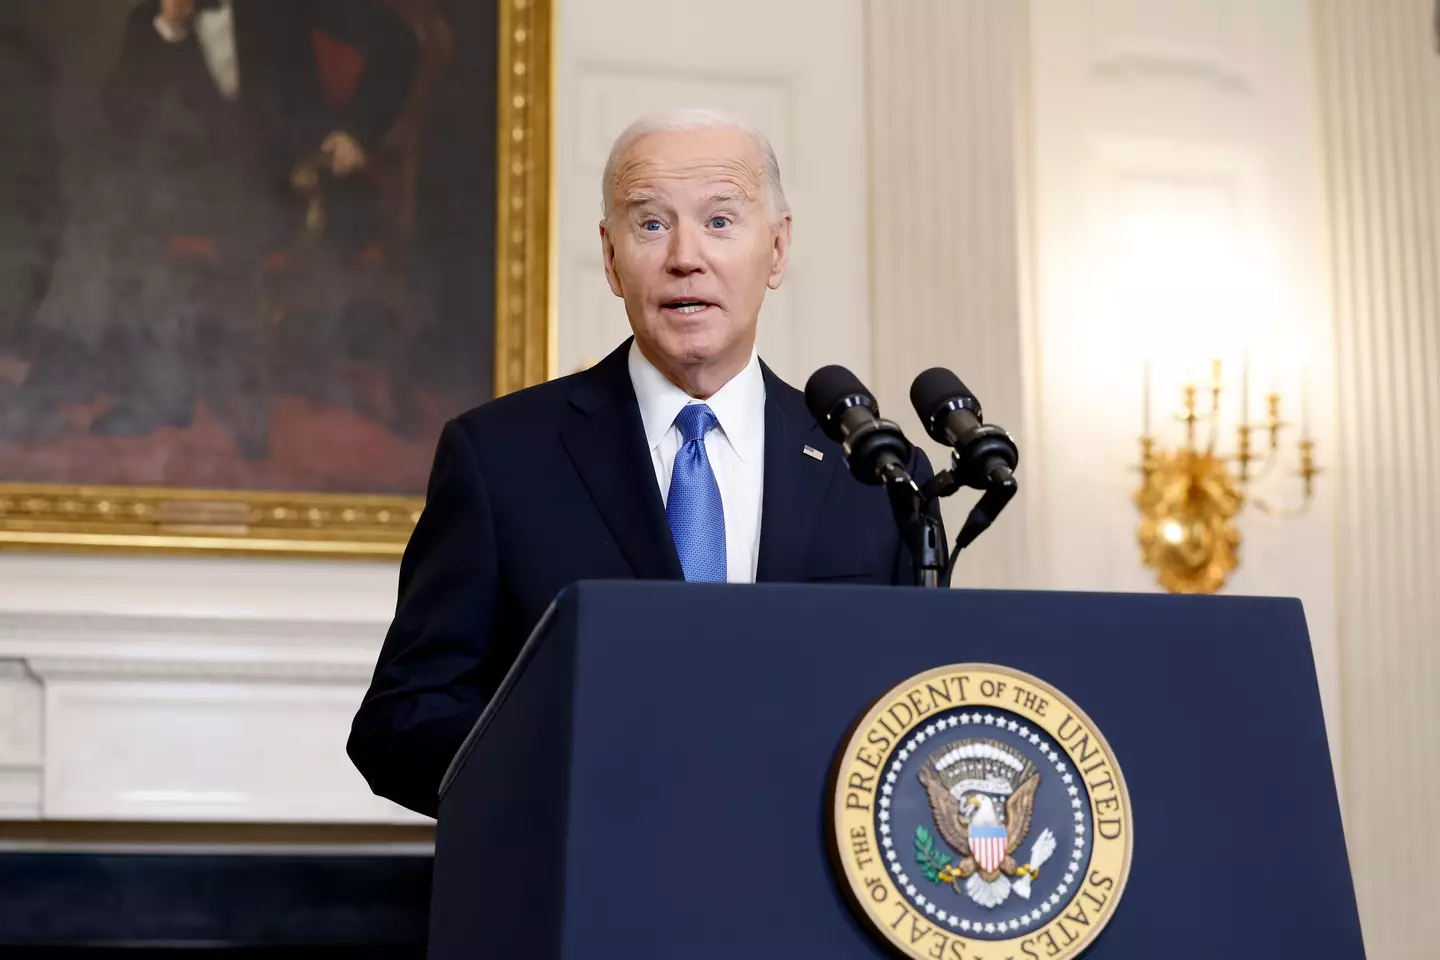 Joe Biden signed the bill after it passed in the senate. (Anna Moneymaker/Getty Images)